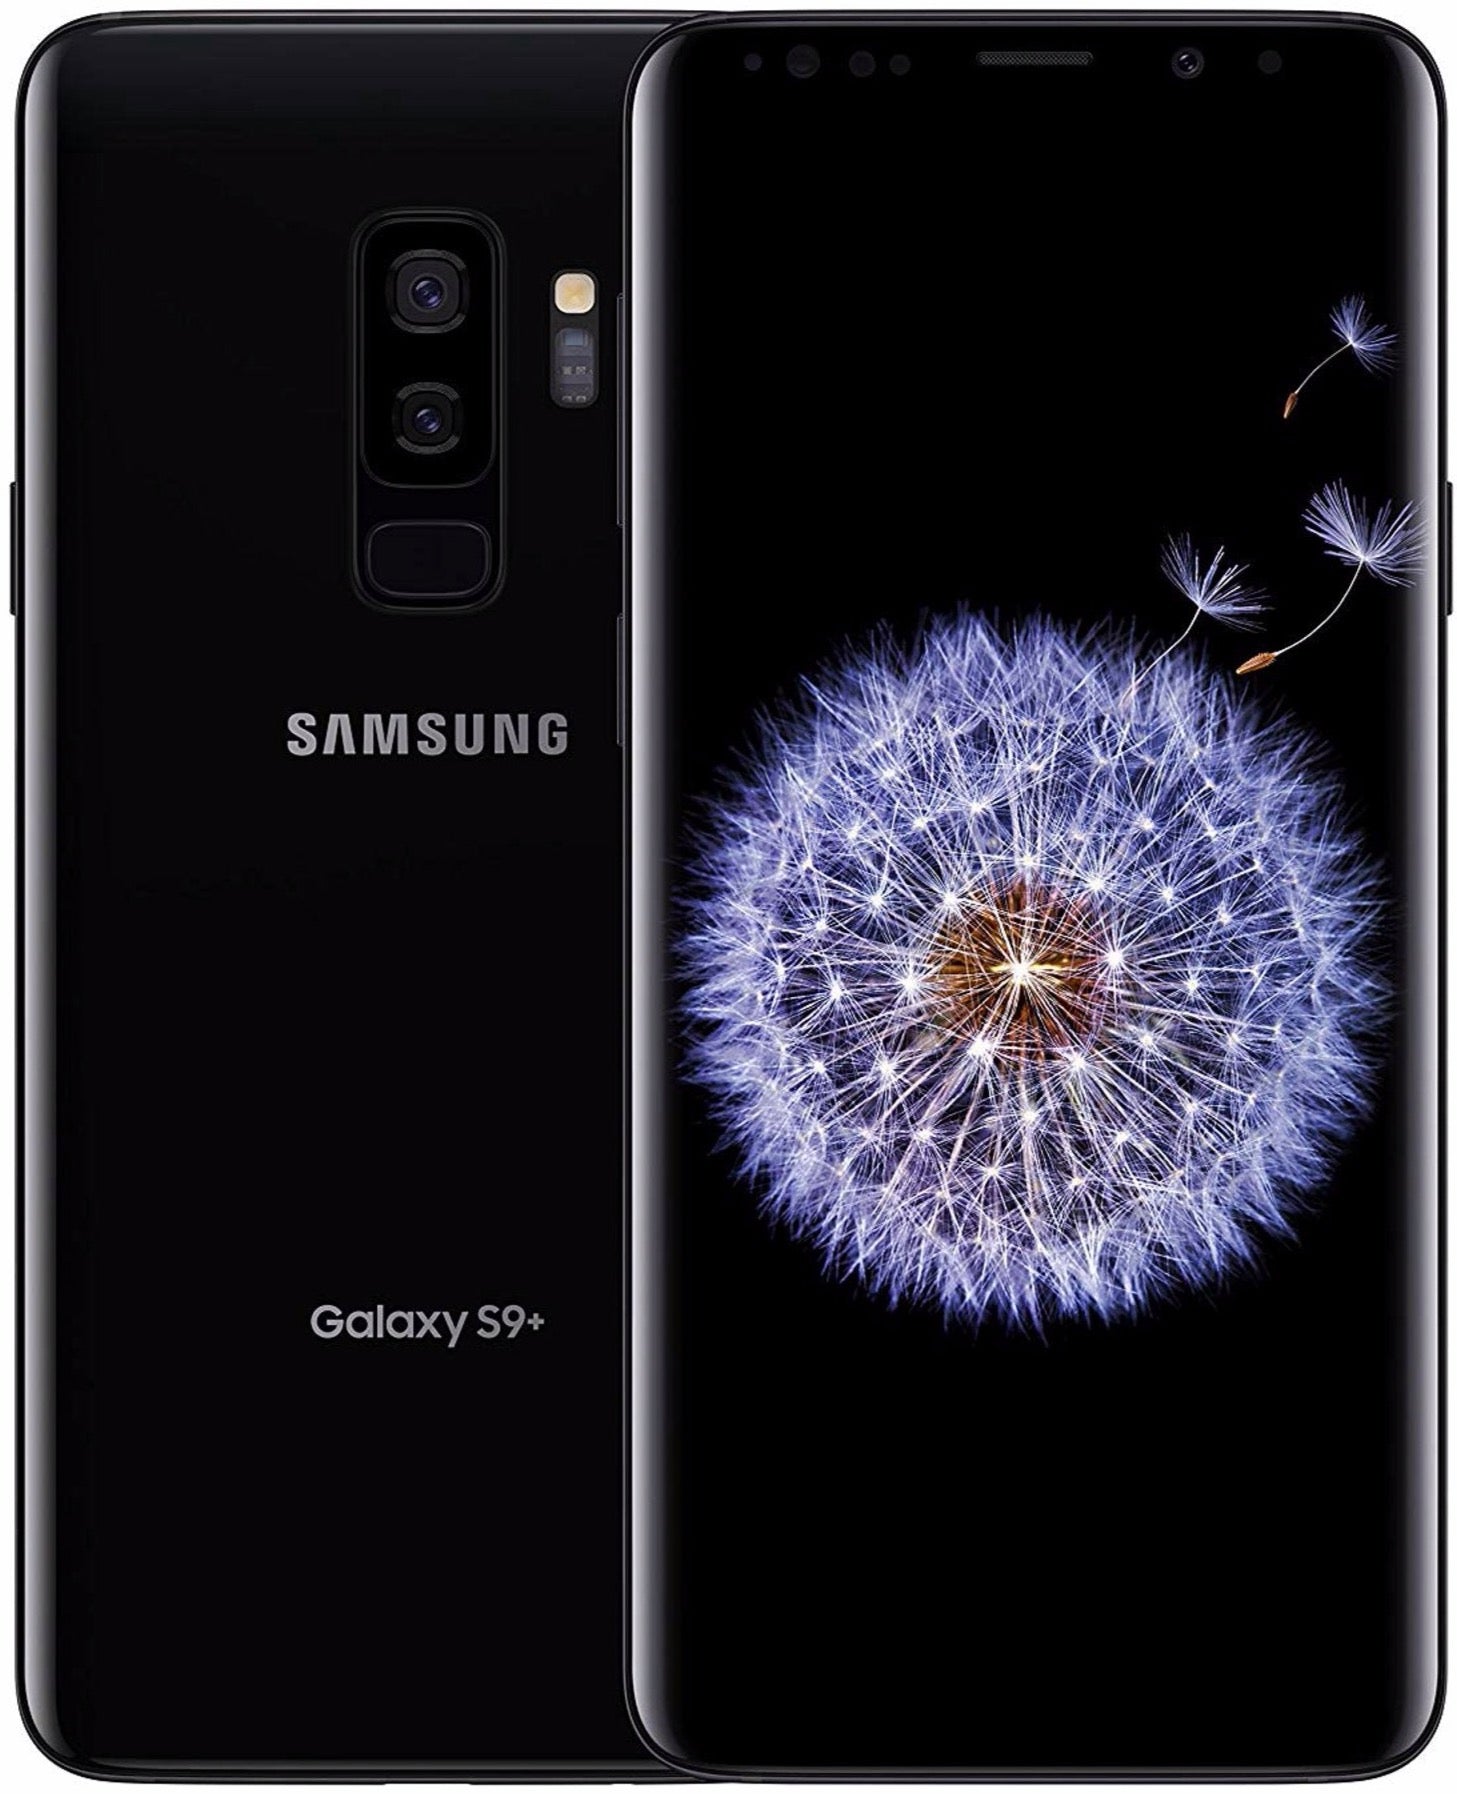 Samsung Galaxy S9 Plus 64GB Black (Like New) With Case, Screen Protector & Shipping